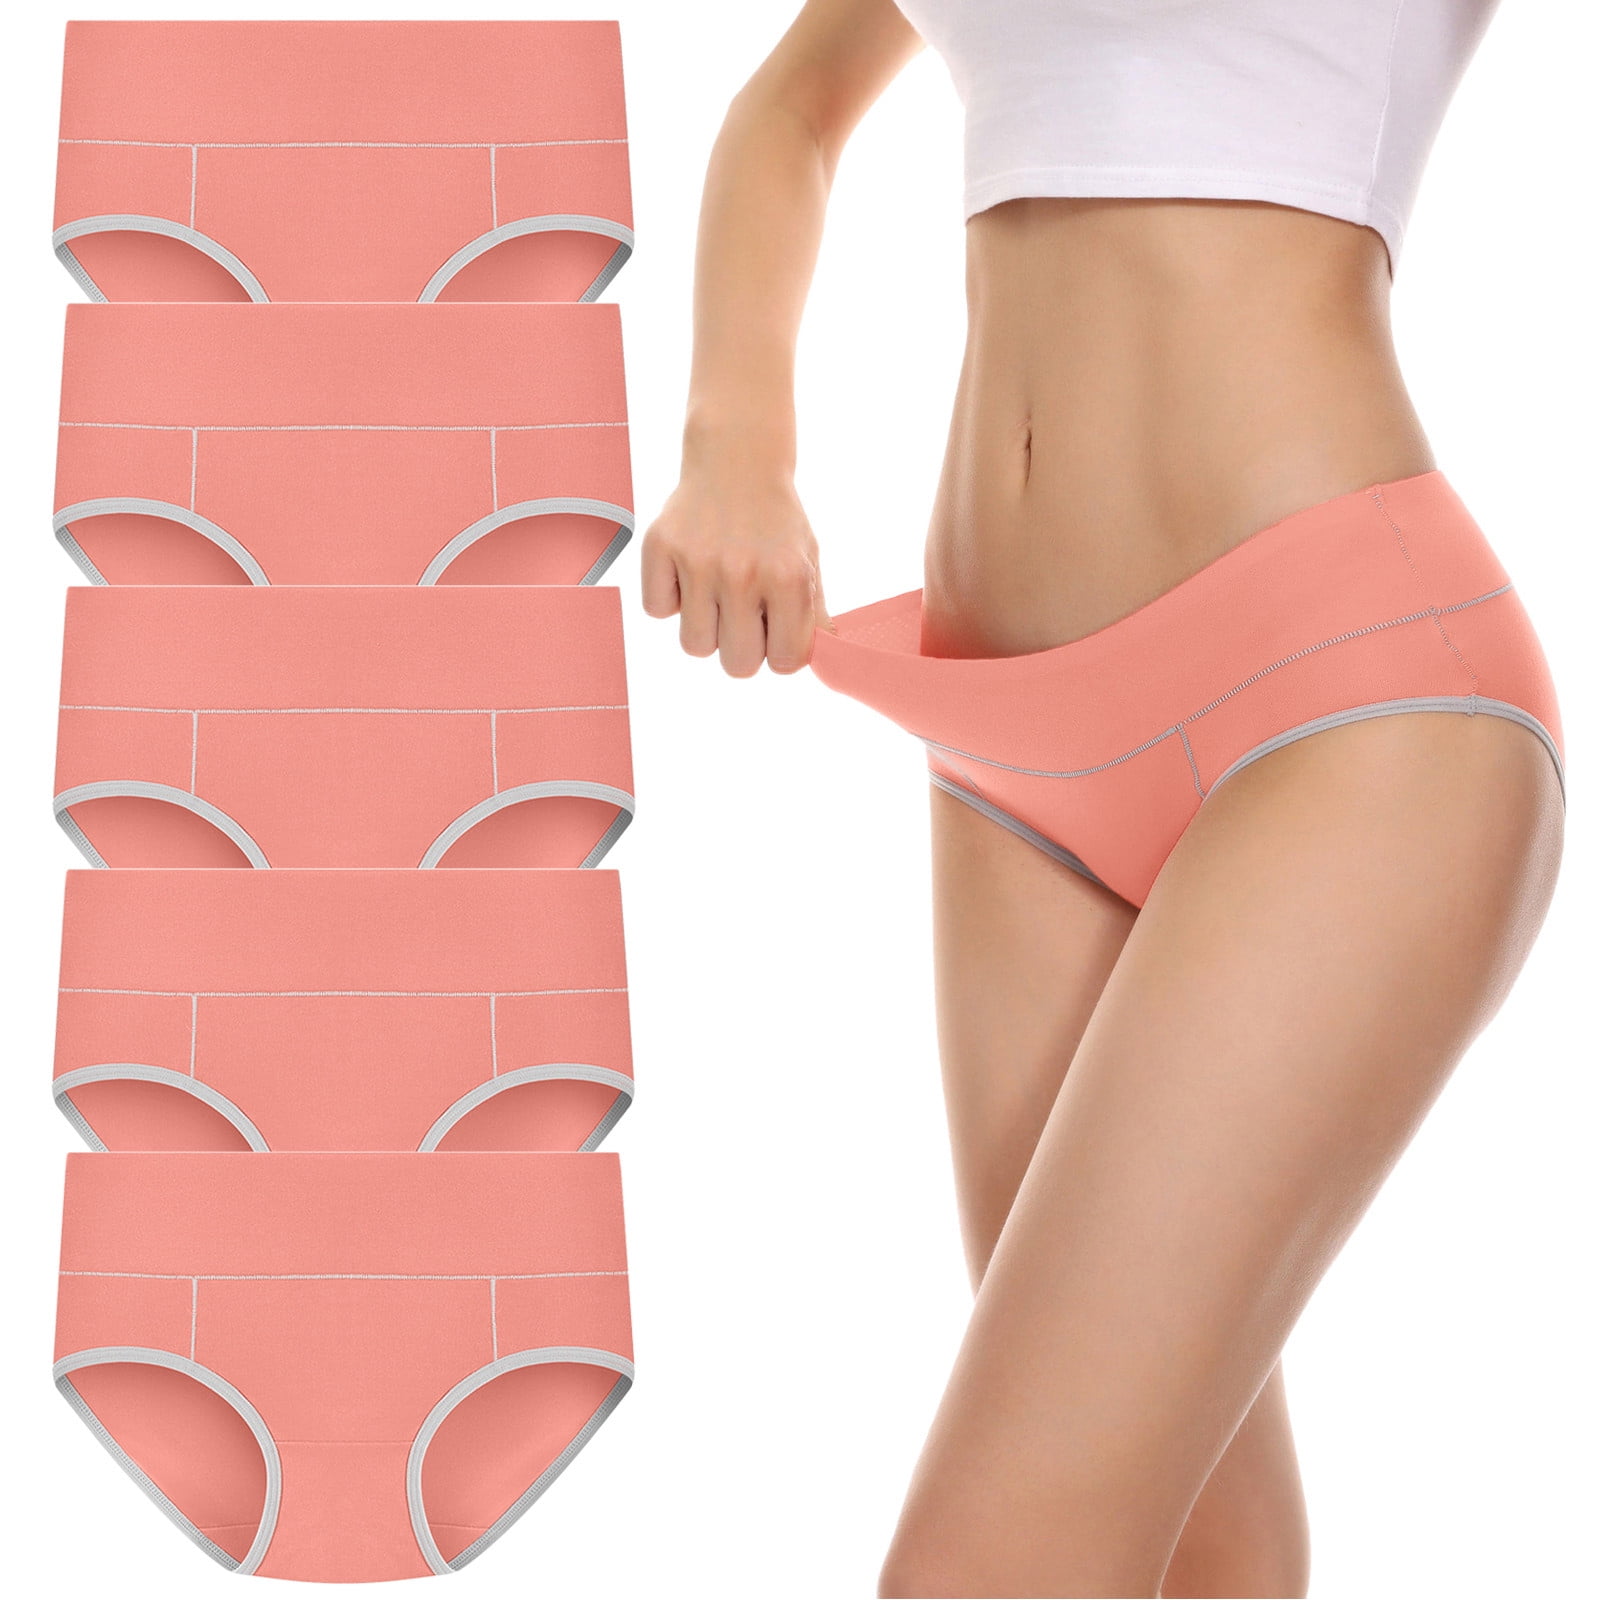 linqin Girls Underpants Bamboo Sweatproof Underwear Breathable No Seam  Underwear Daisy Check Underwear for Women at  Women's Clothing store